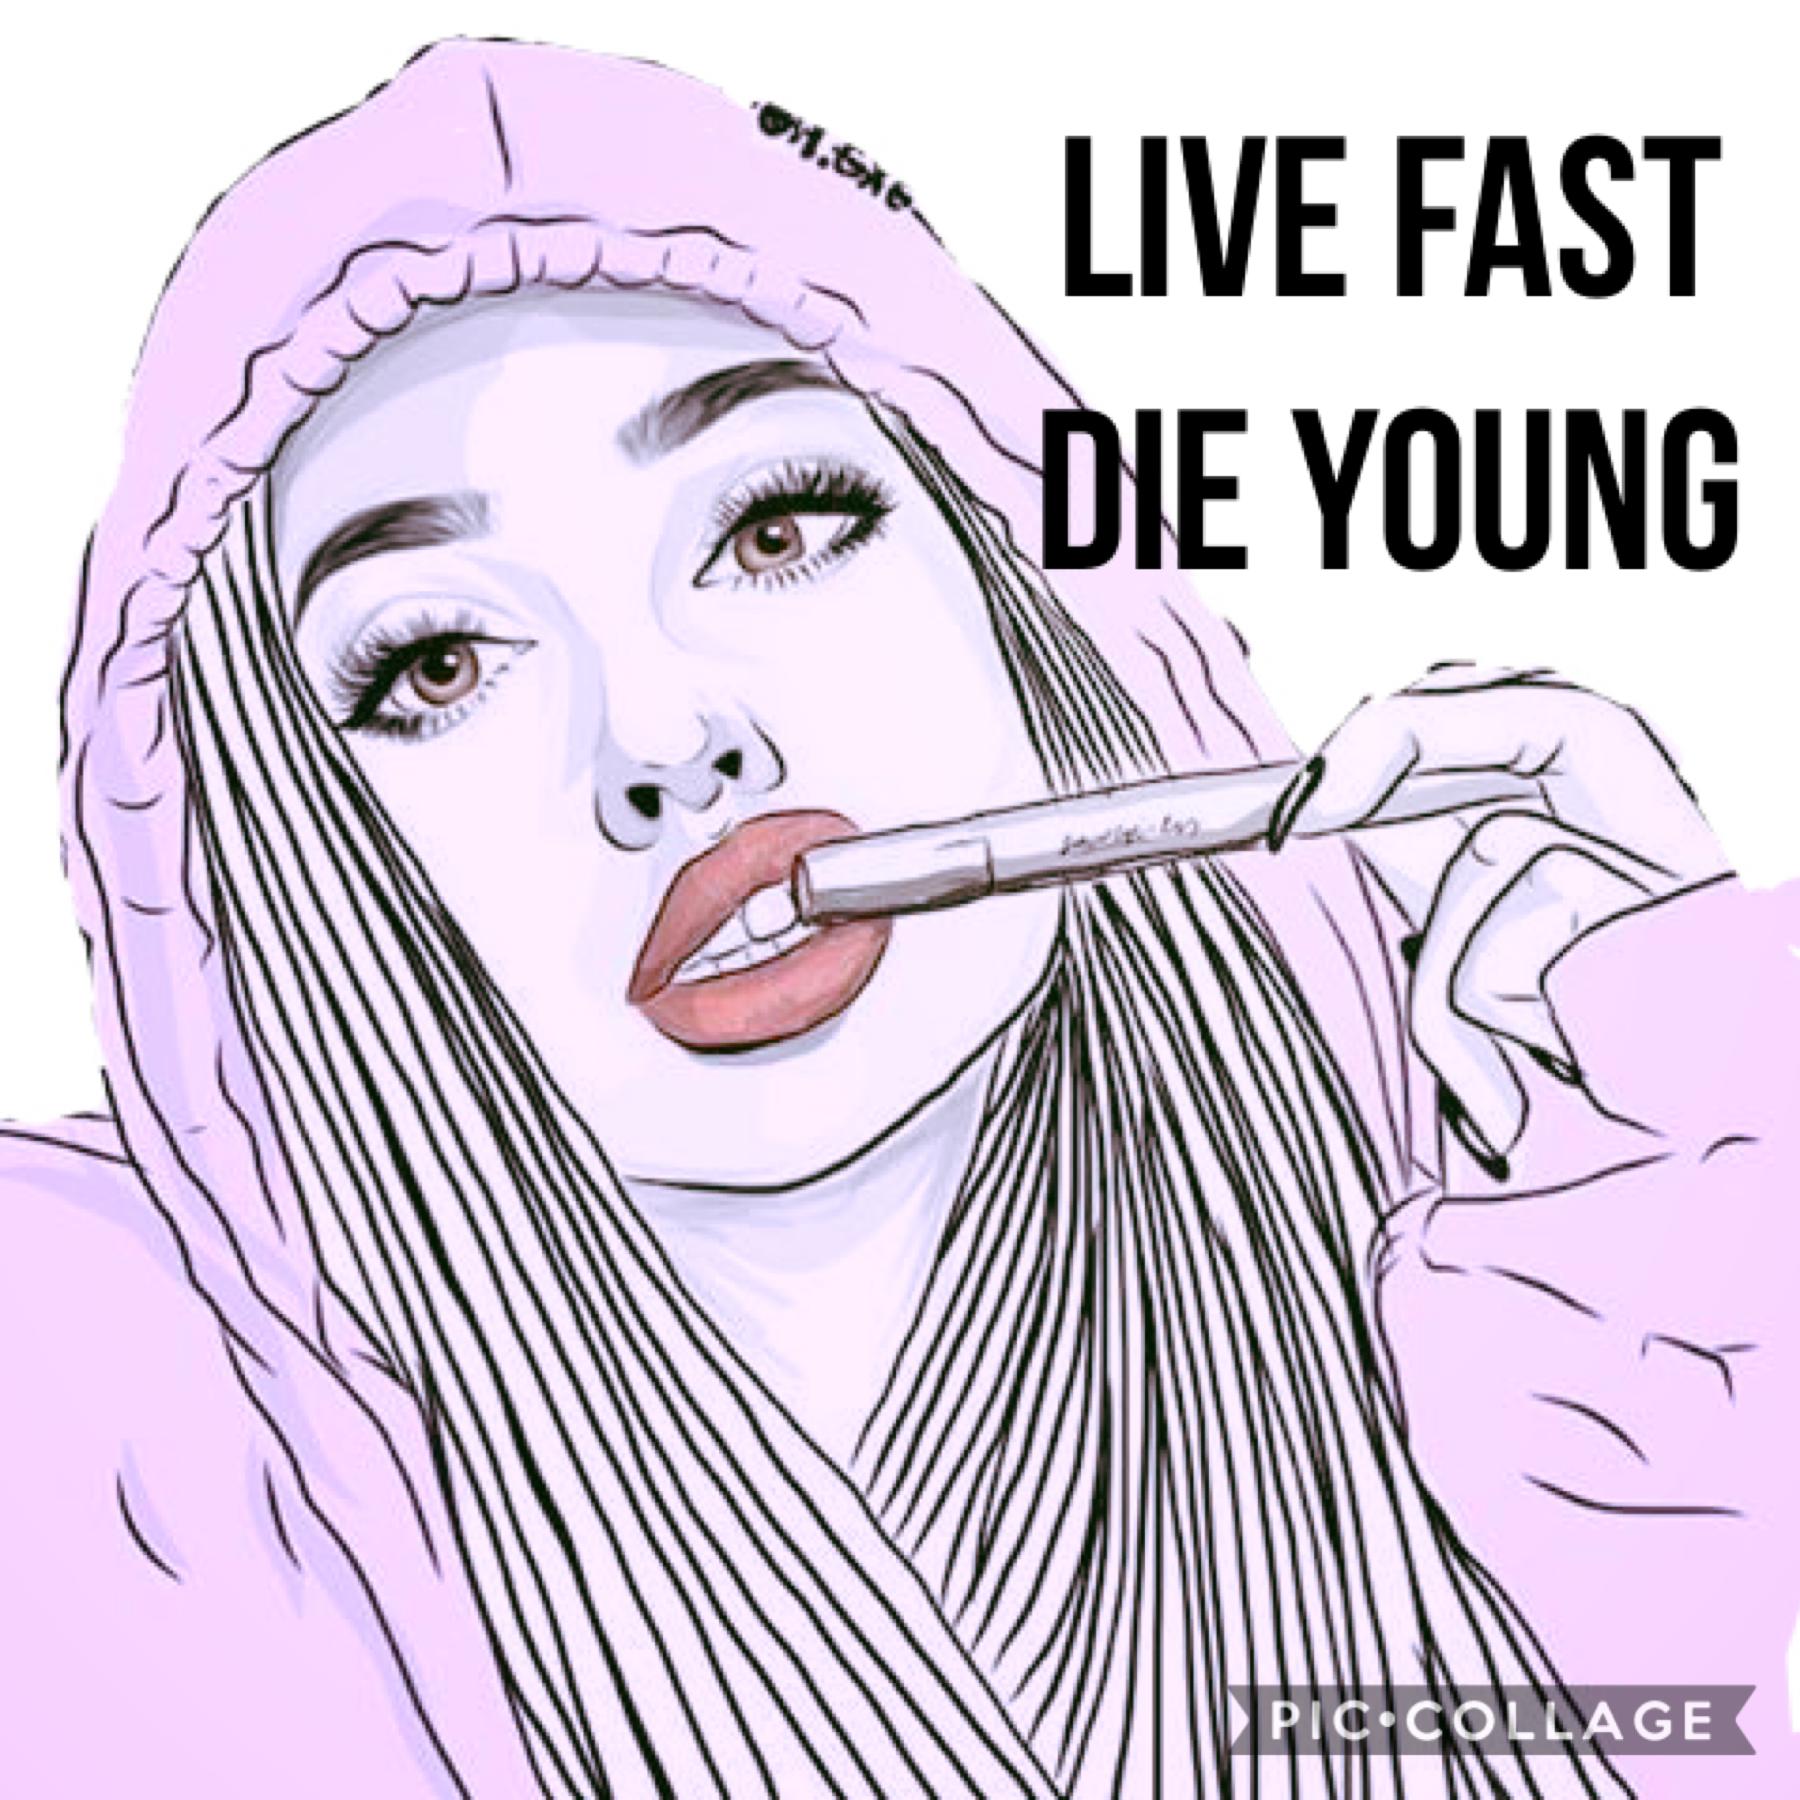 Live Fast Die Young 💜